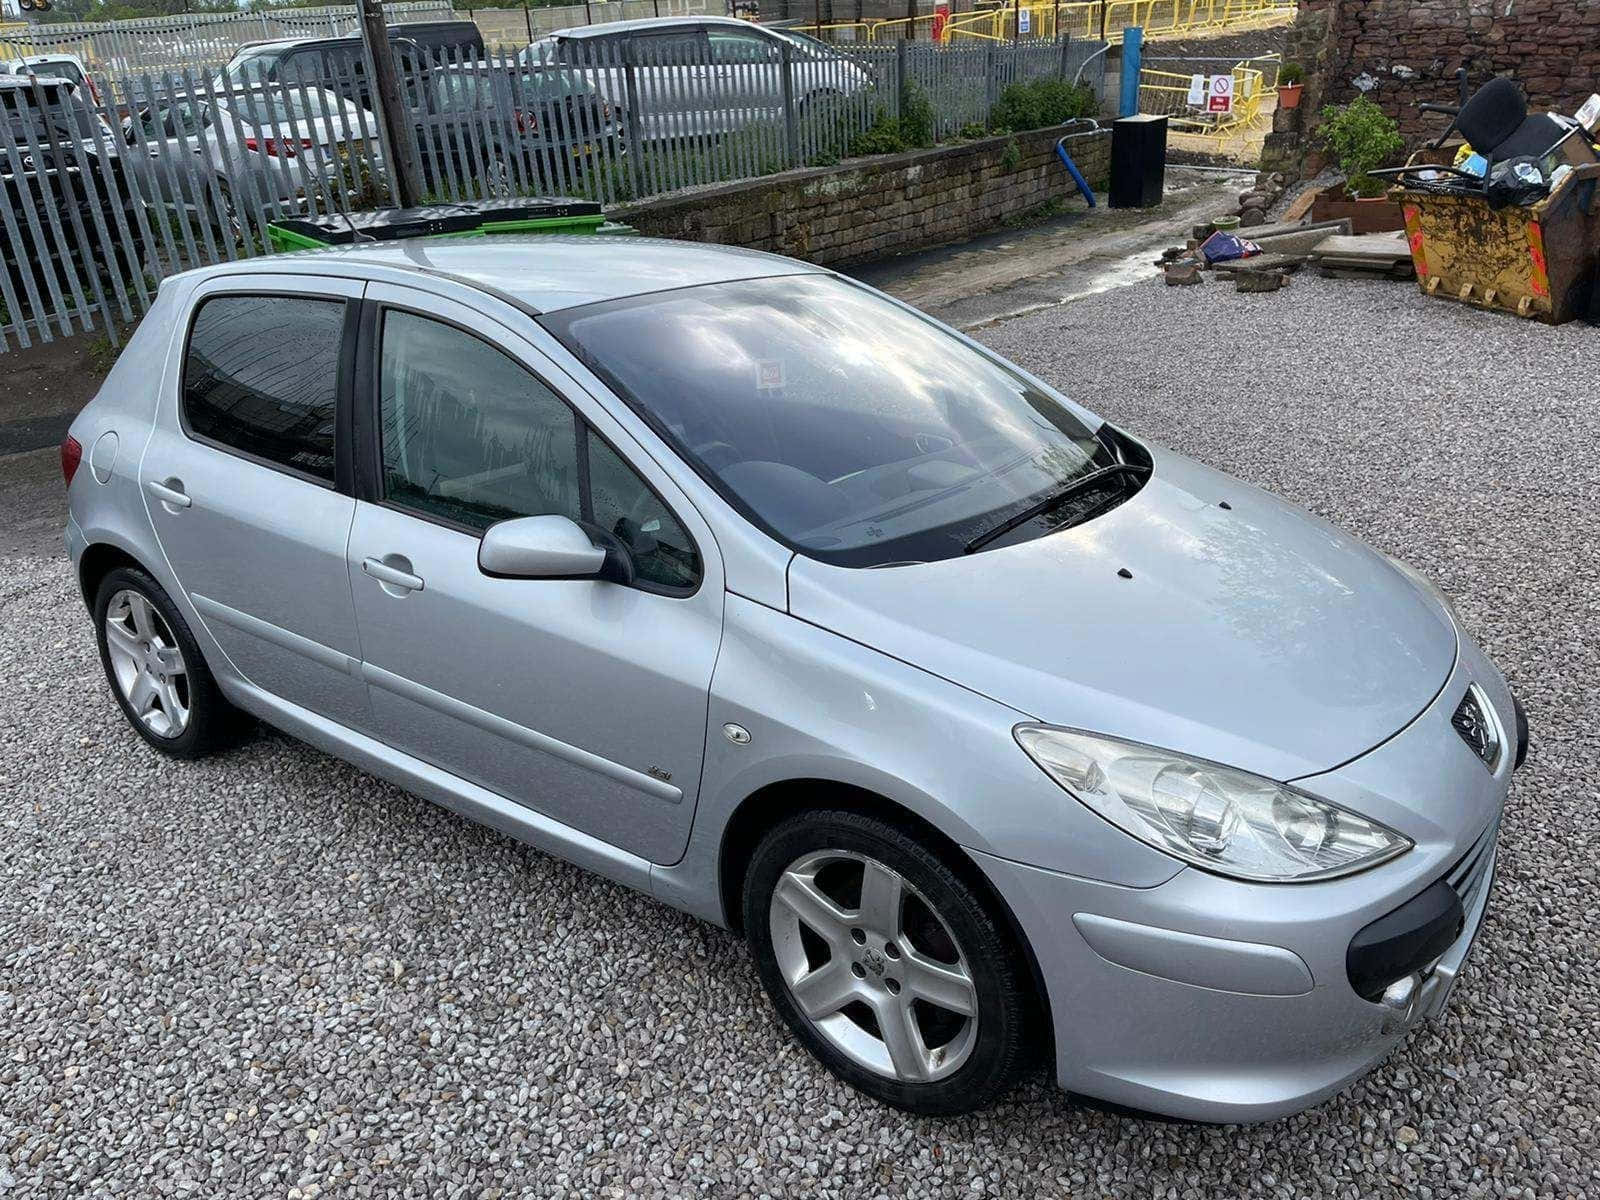 Caption: Stylish Peugeot 307 Compact Hatchback On A Picturesque Road Wallpaper